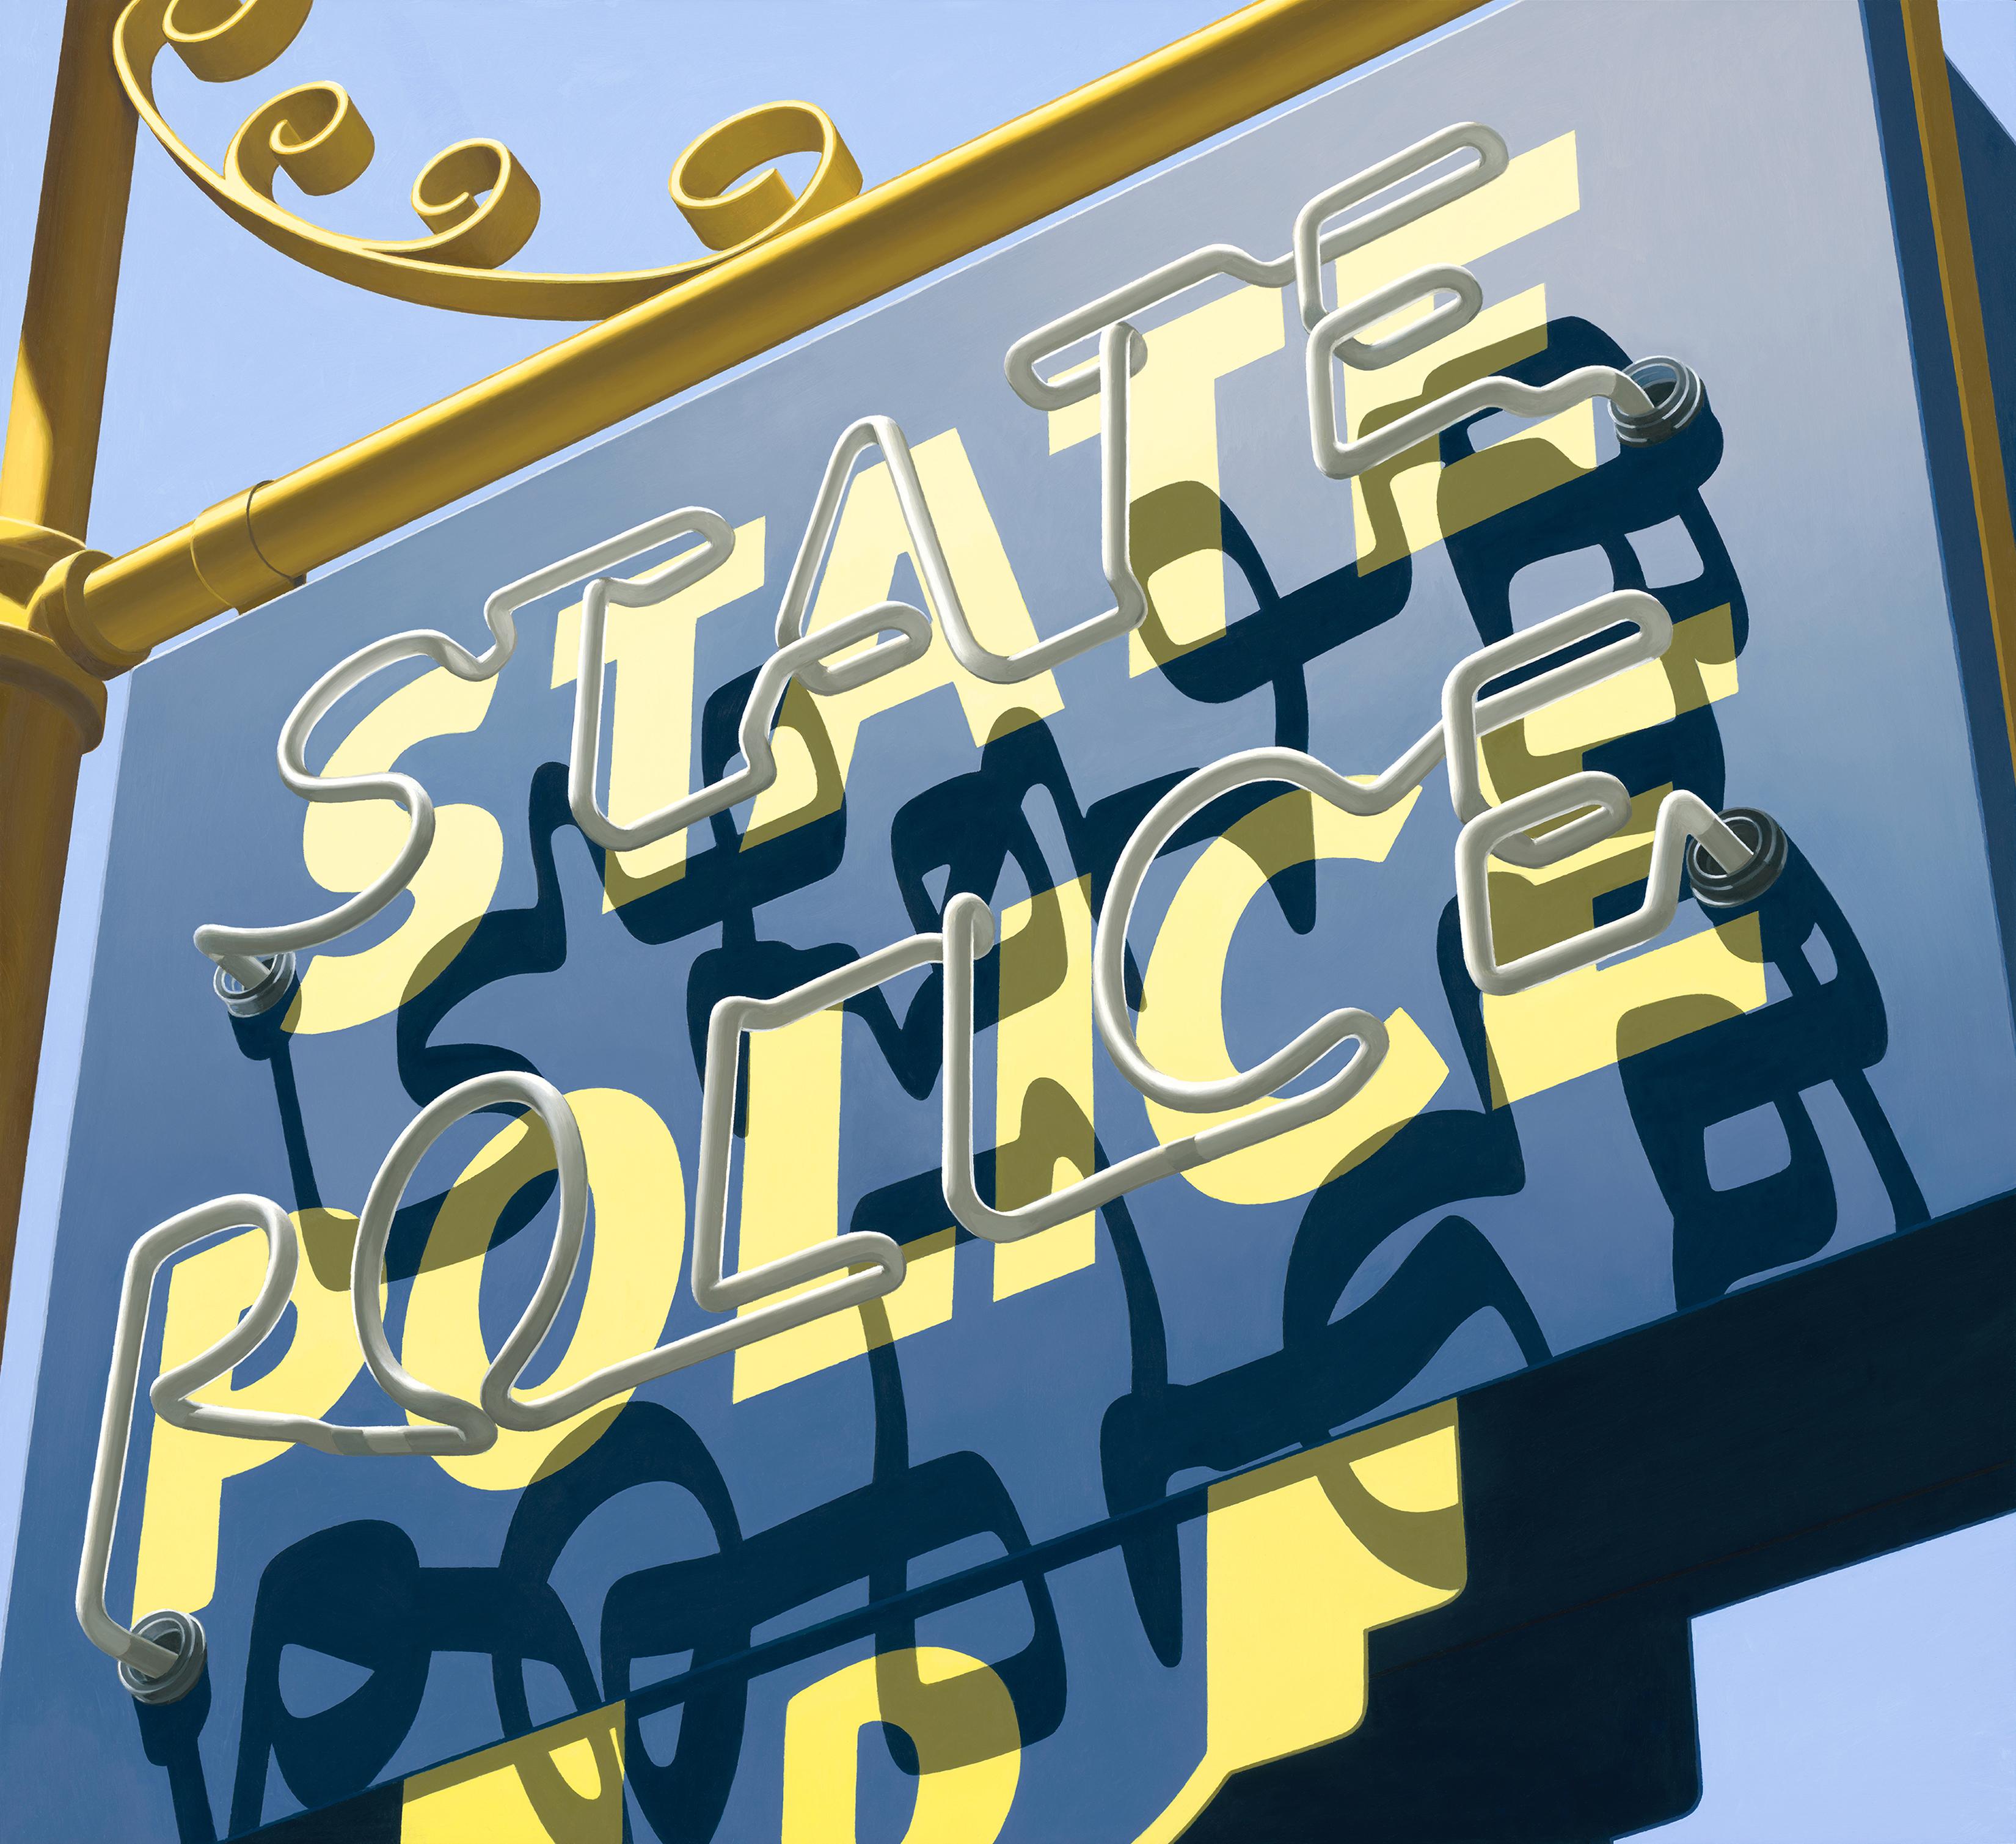 Photorealist sign with blue and yellow, "State Police" (Photorealism) - Painting by Stephanie Schechter